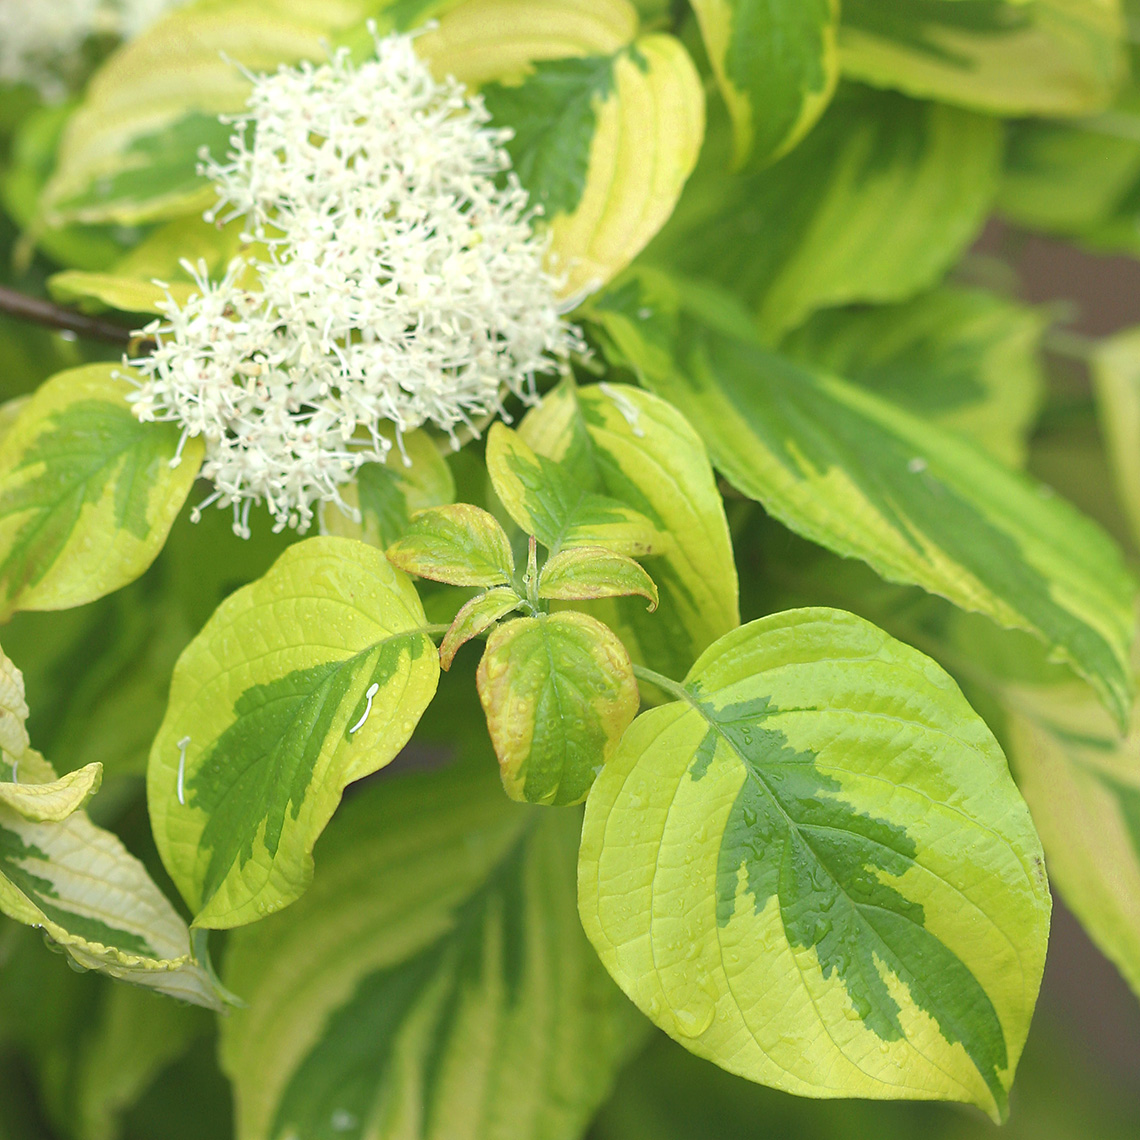 close up of the White flowers on Golden Shadows Cornus